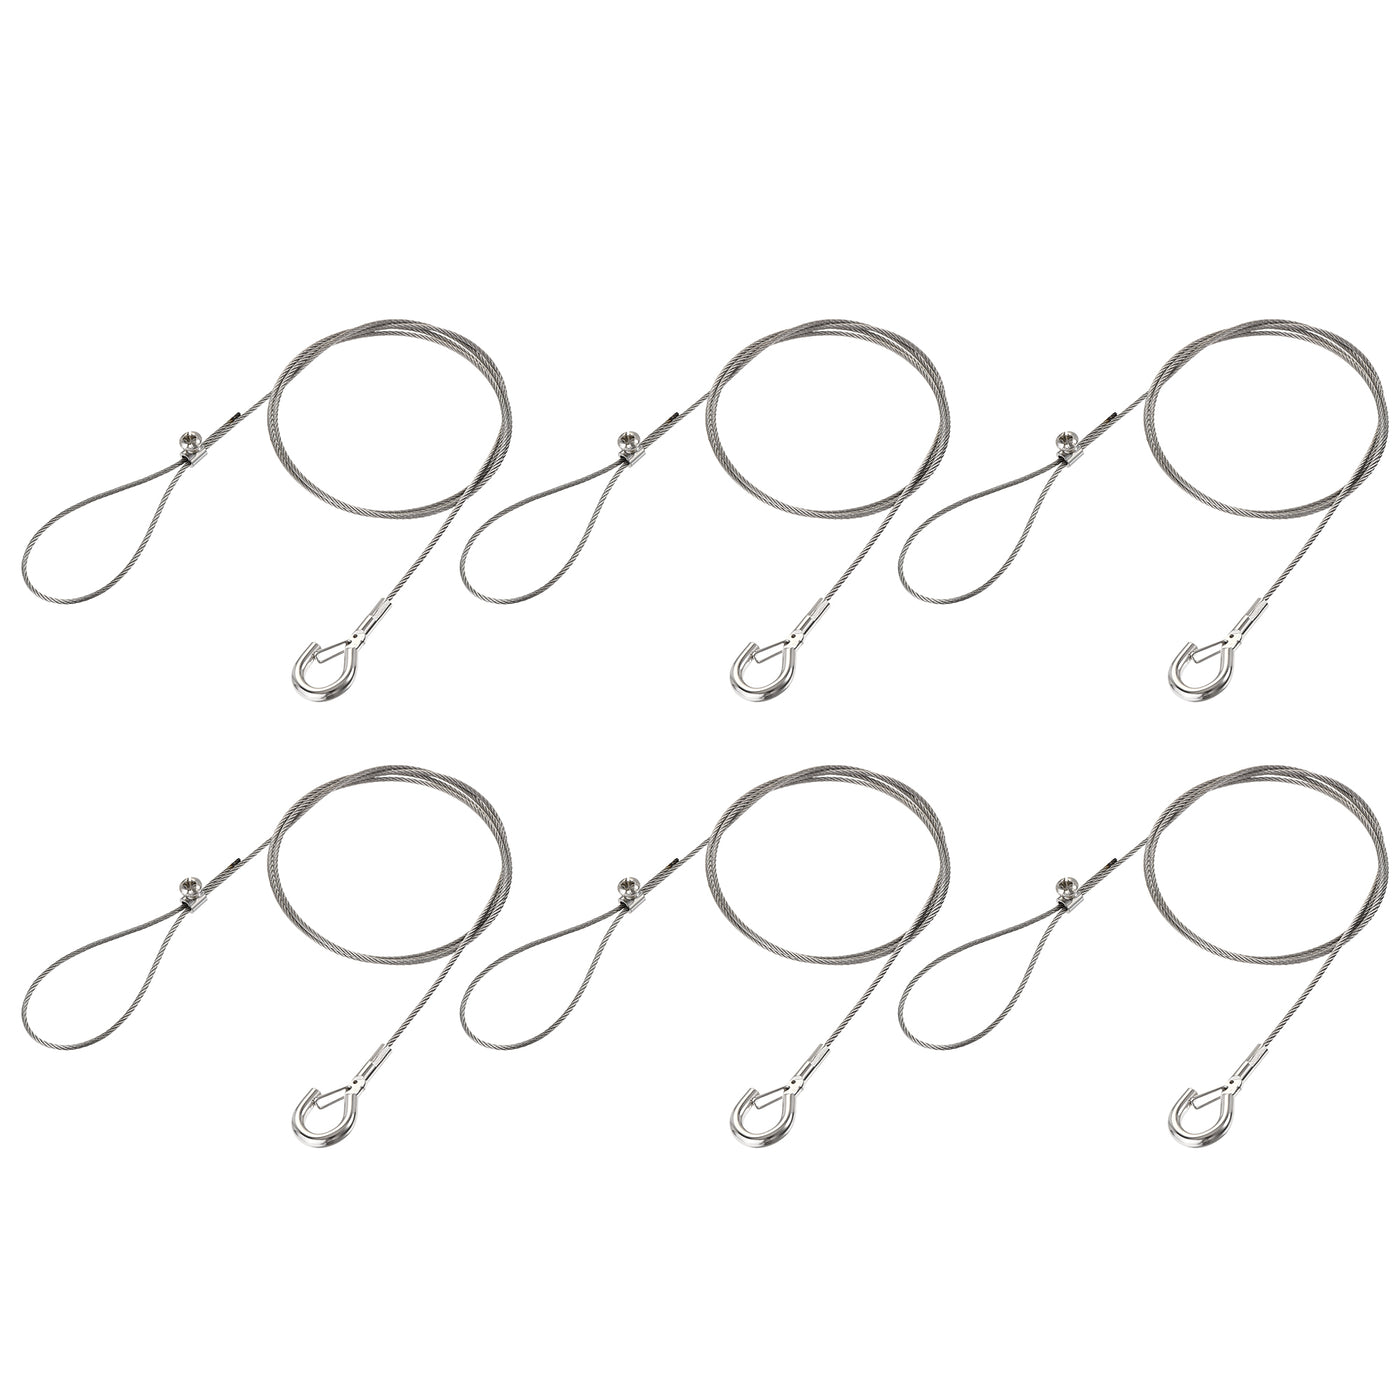 uxcell Uxcell Picture Hanging Wire Kit, 6Set 1M Adjustable Hanger Wire Hook for Home Art Gallery Picture Kit, Load 66 lbs, with Single Hole Fixing Screws